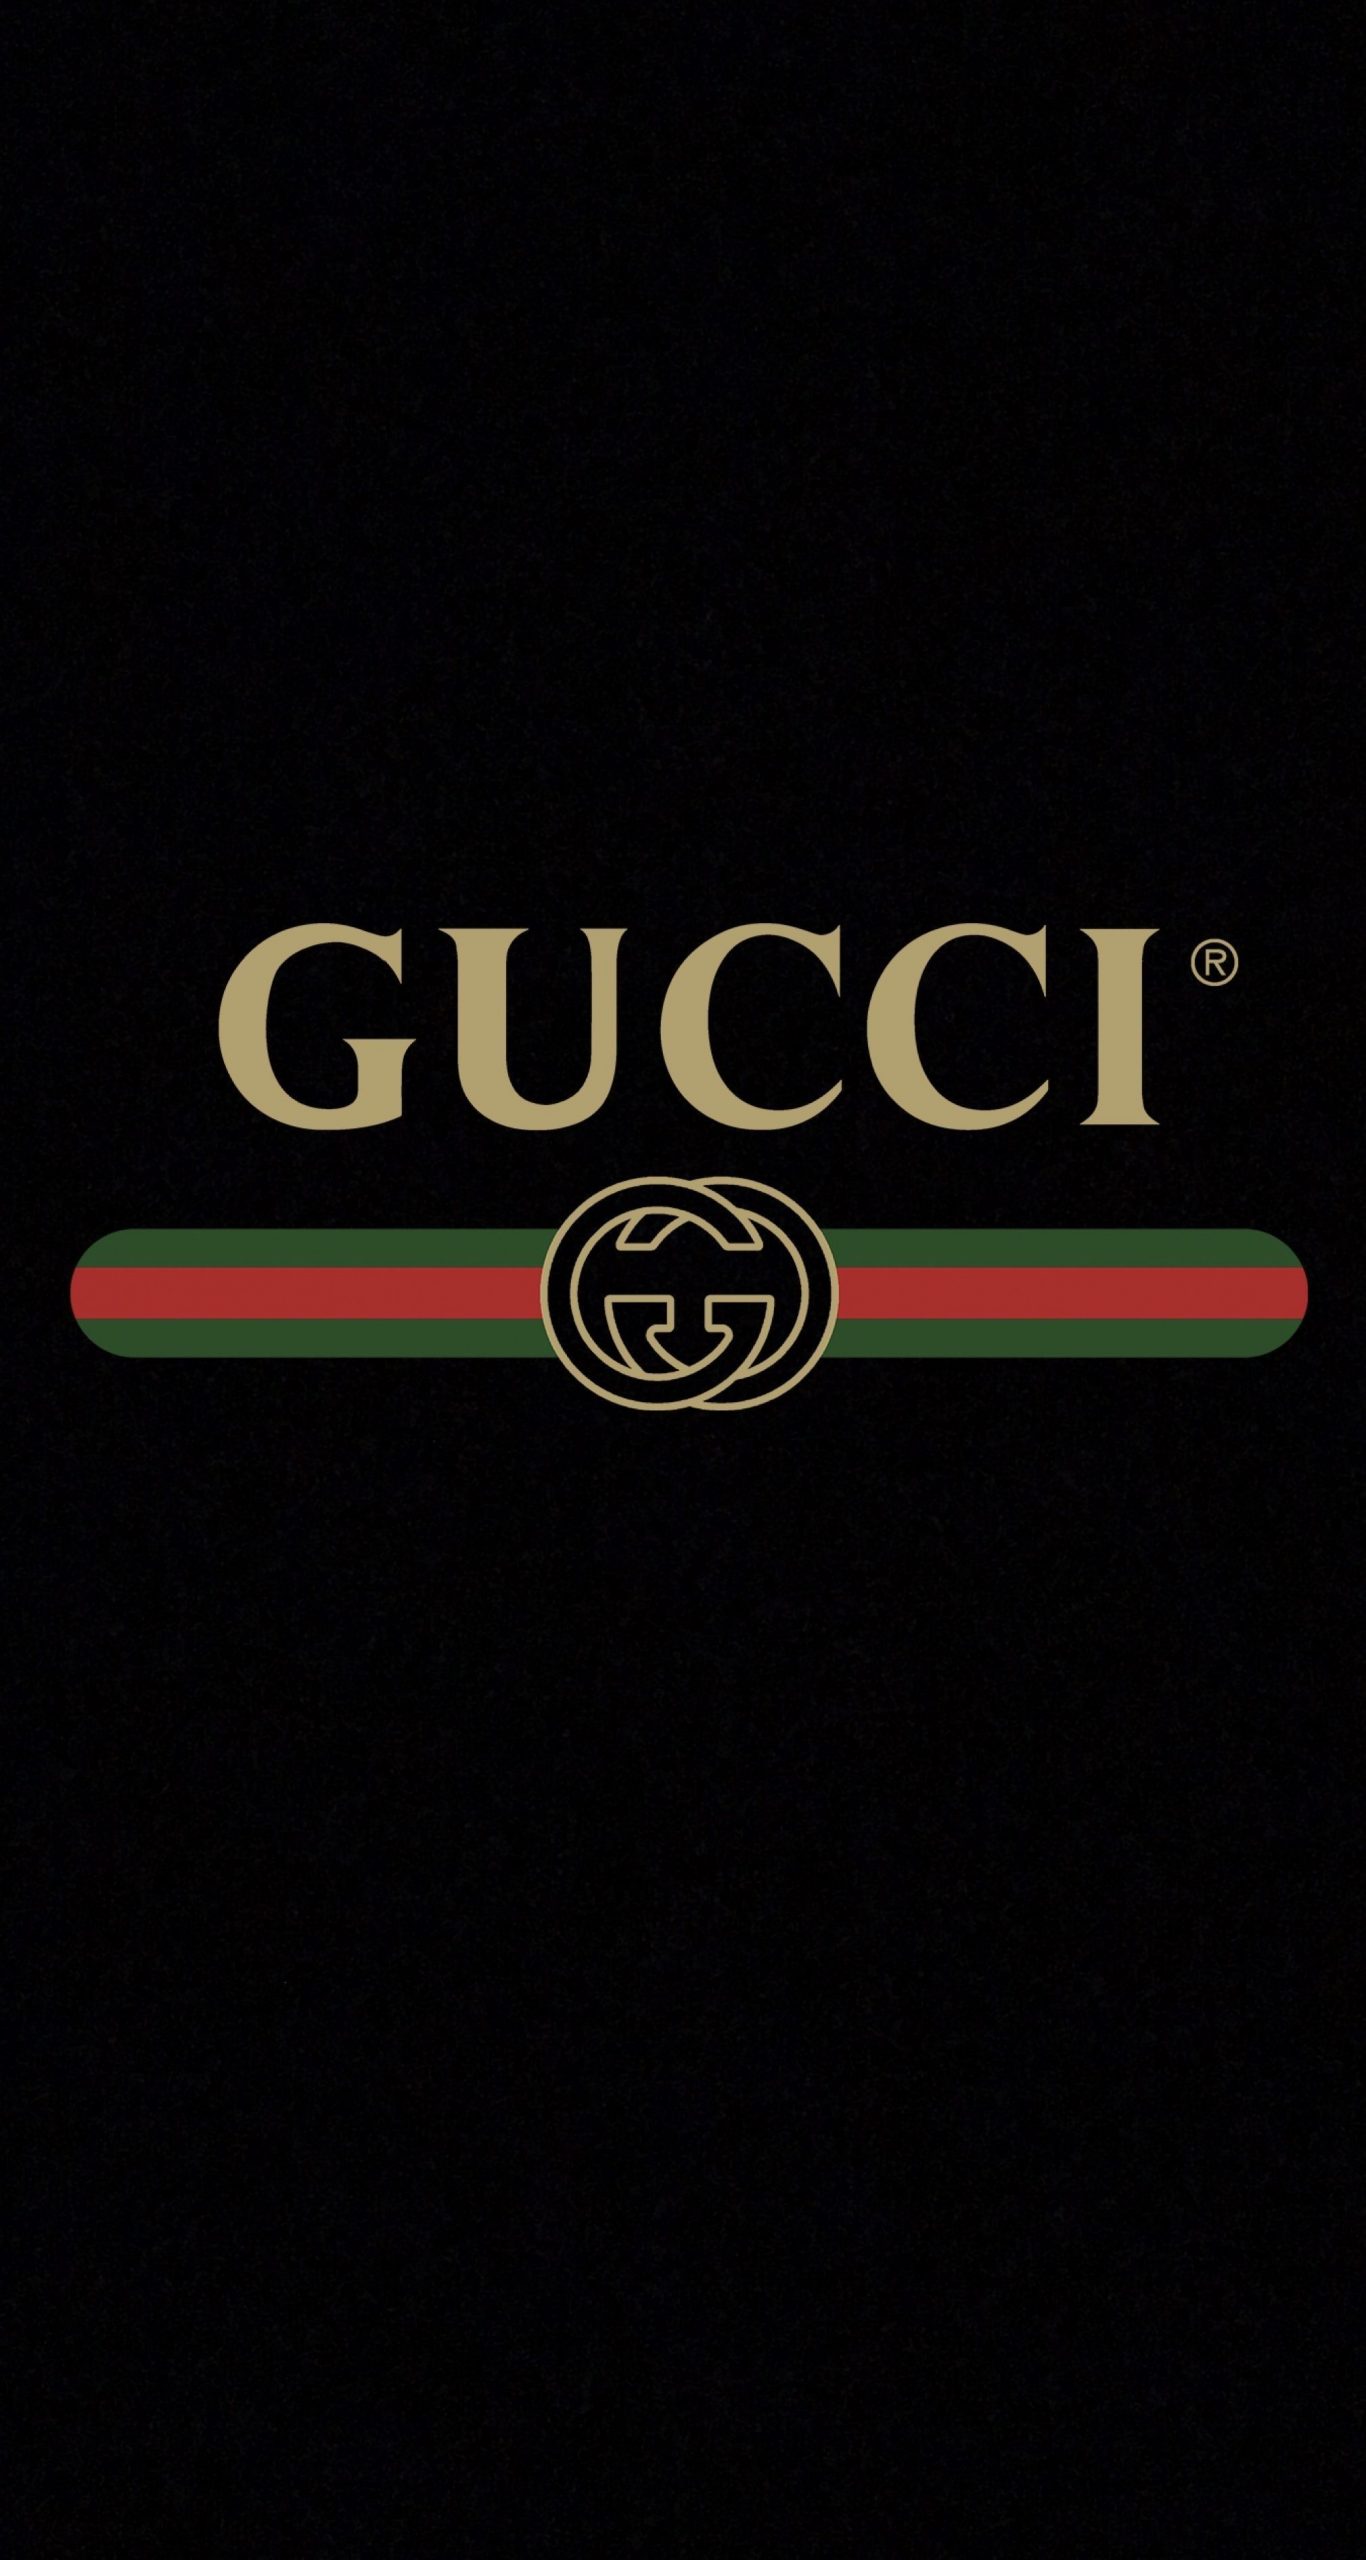 Cute Gucci Shoes Wallpapers